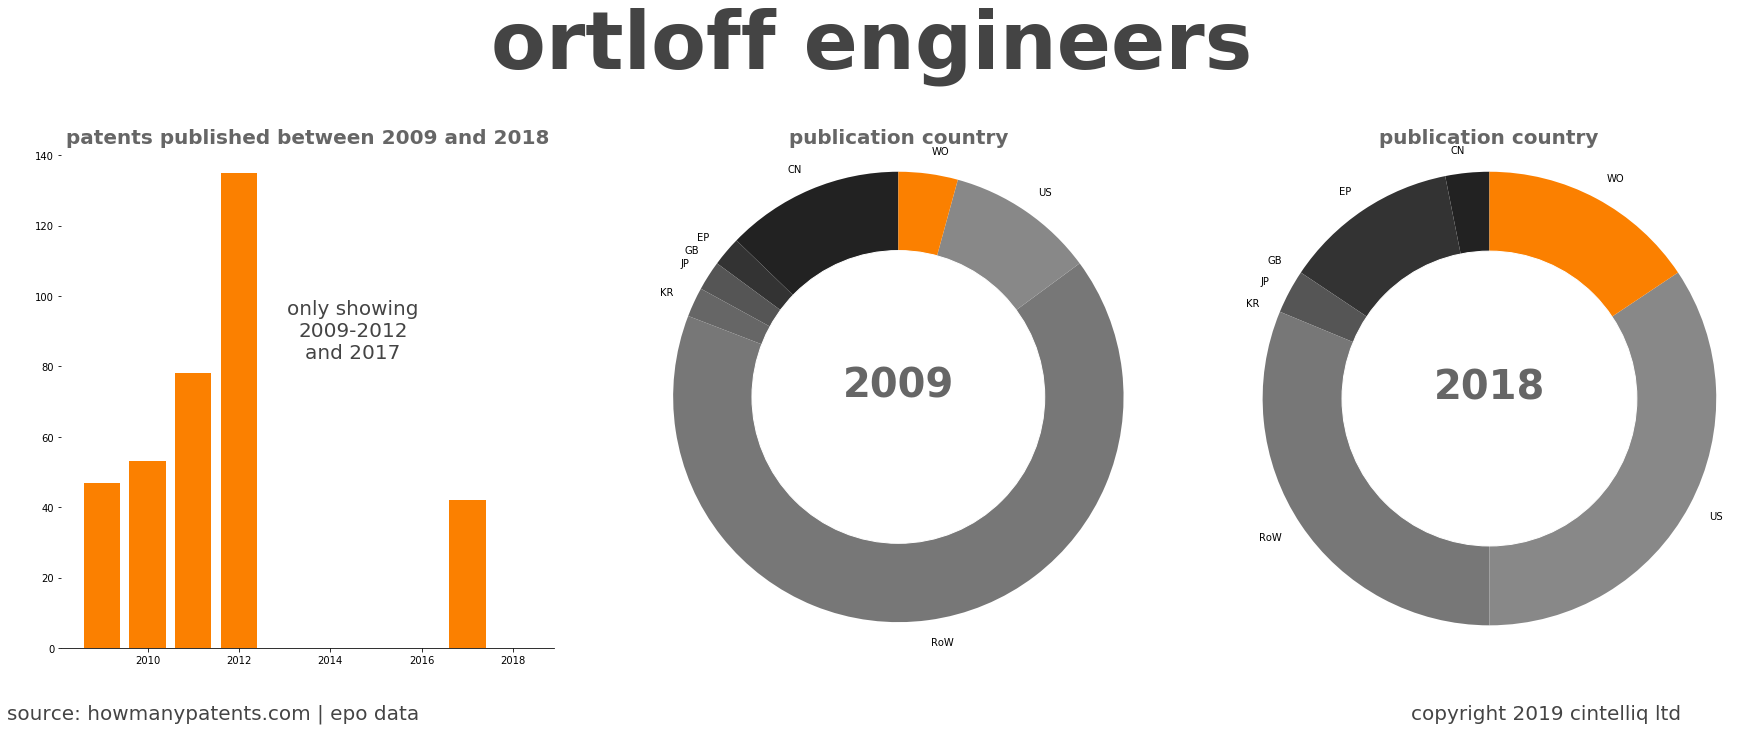 summary of patents for Ortloff Engineers